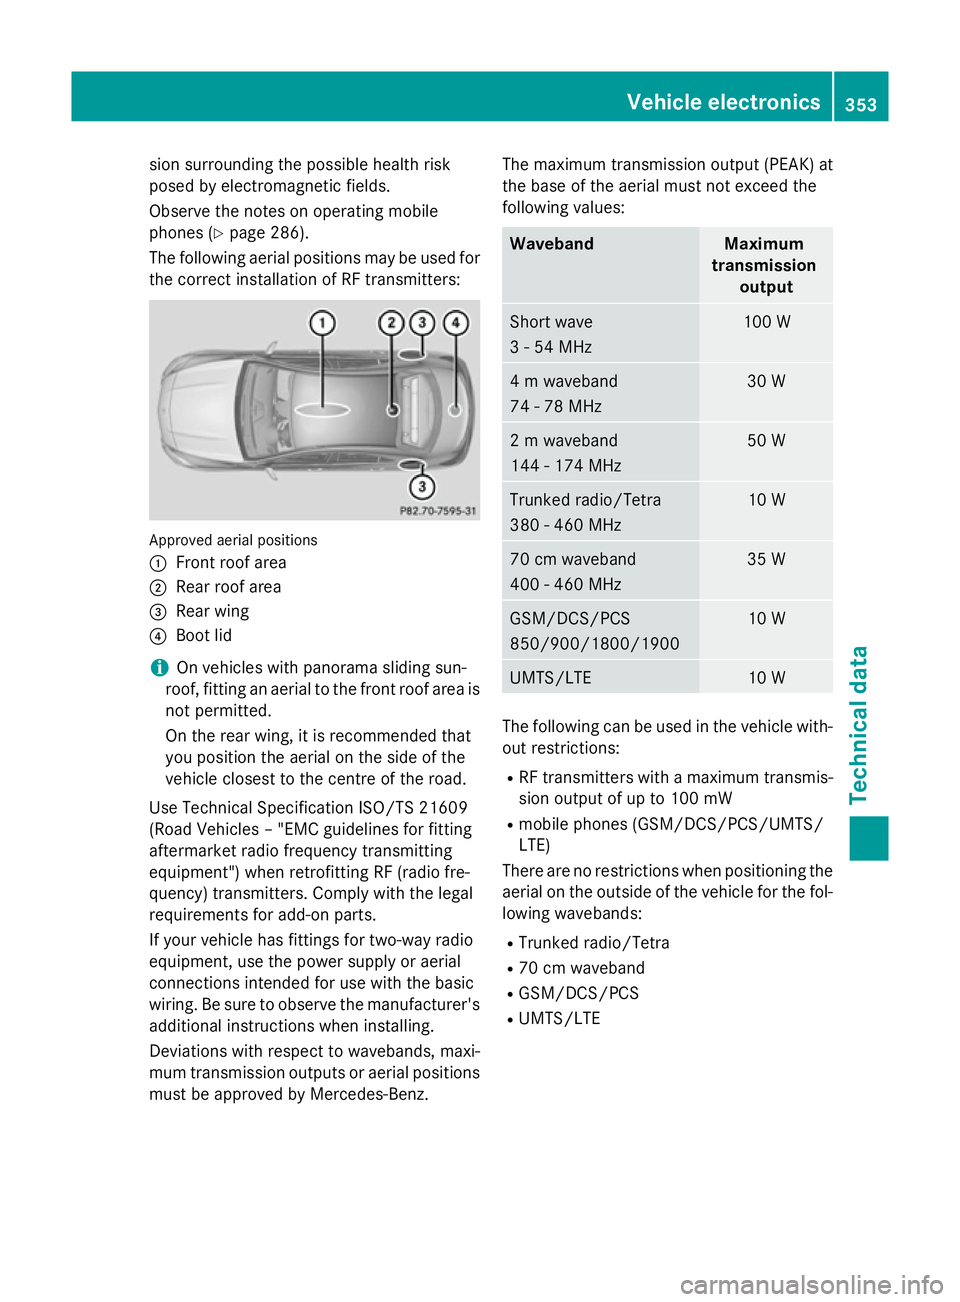 MERCEDES-BENZ CLA COUPE 2013  Owners Manual sion surrounding the possible health risk
posed by electromagnetic fields.
Observe the notes on operating mobile
phones (Y page 286).
The following aerial positions may be used for the correct install